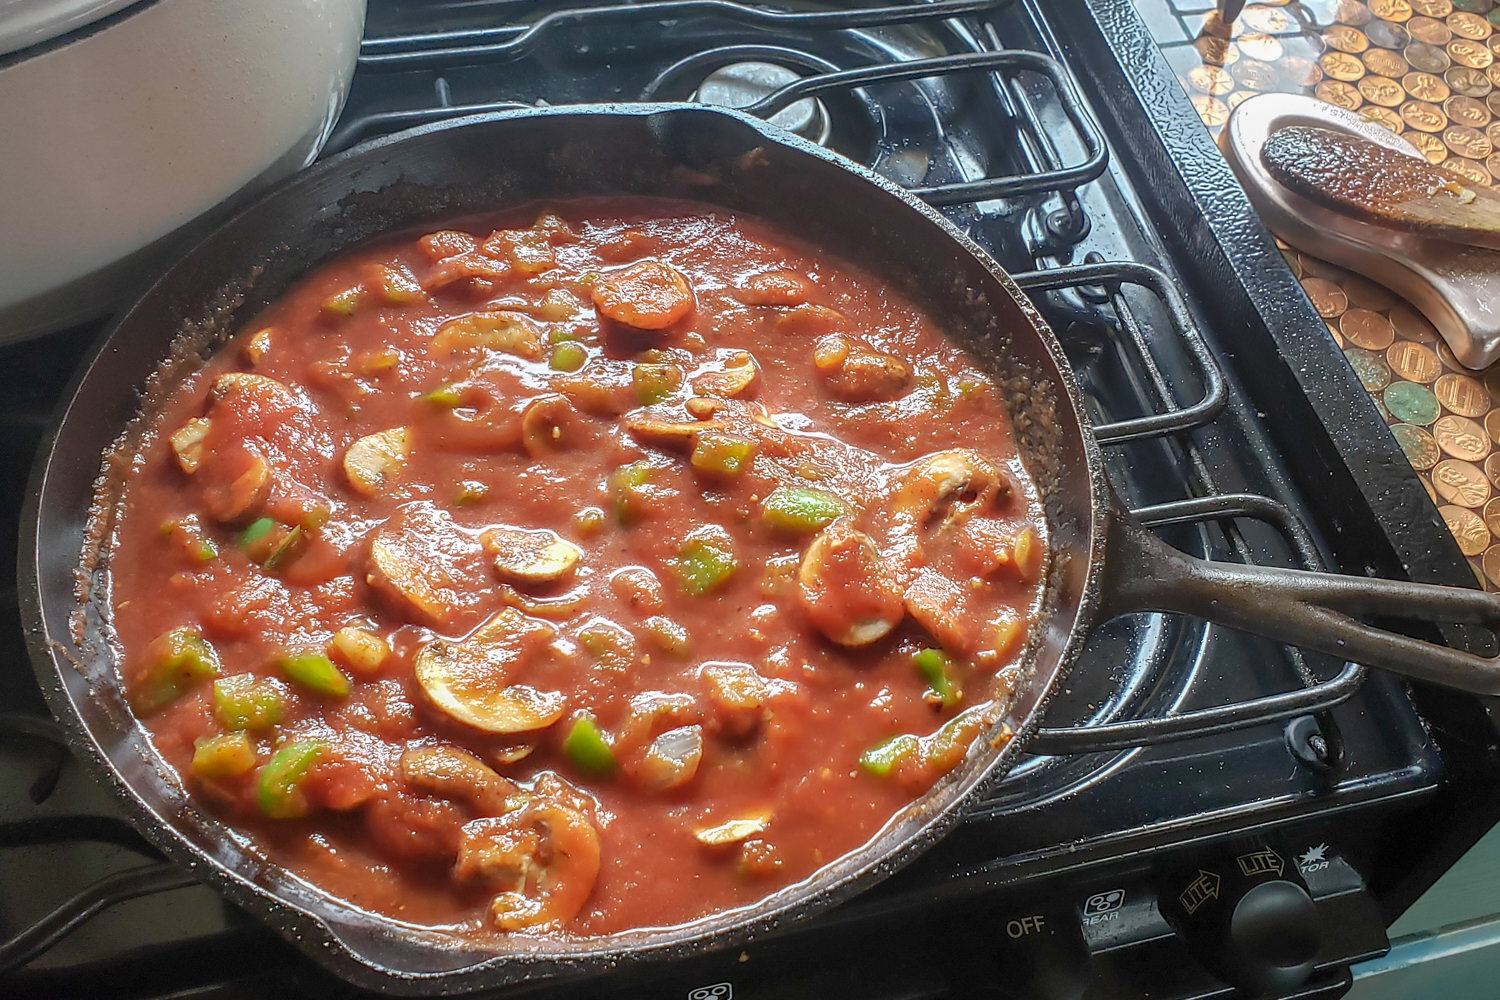 cooking spaghetti sauce at home